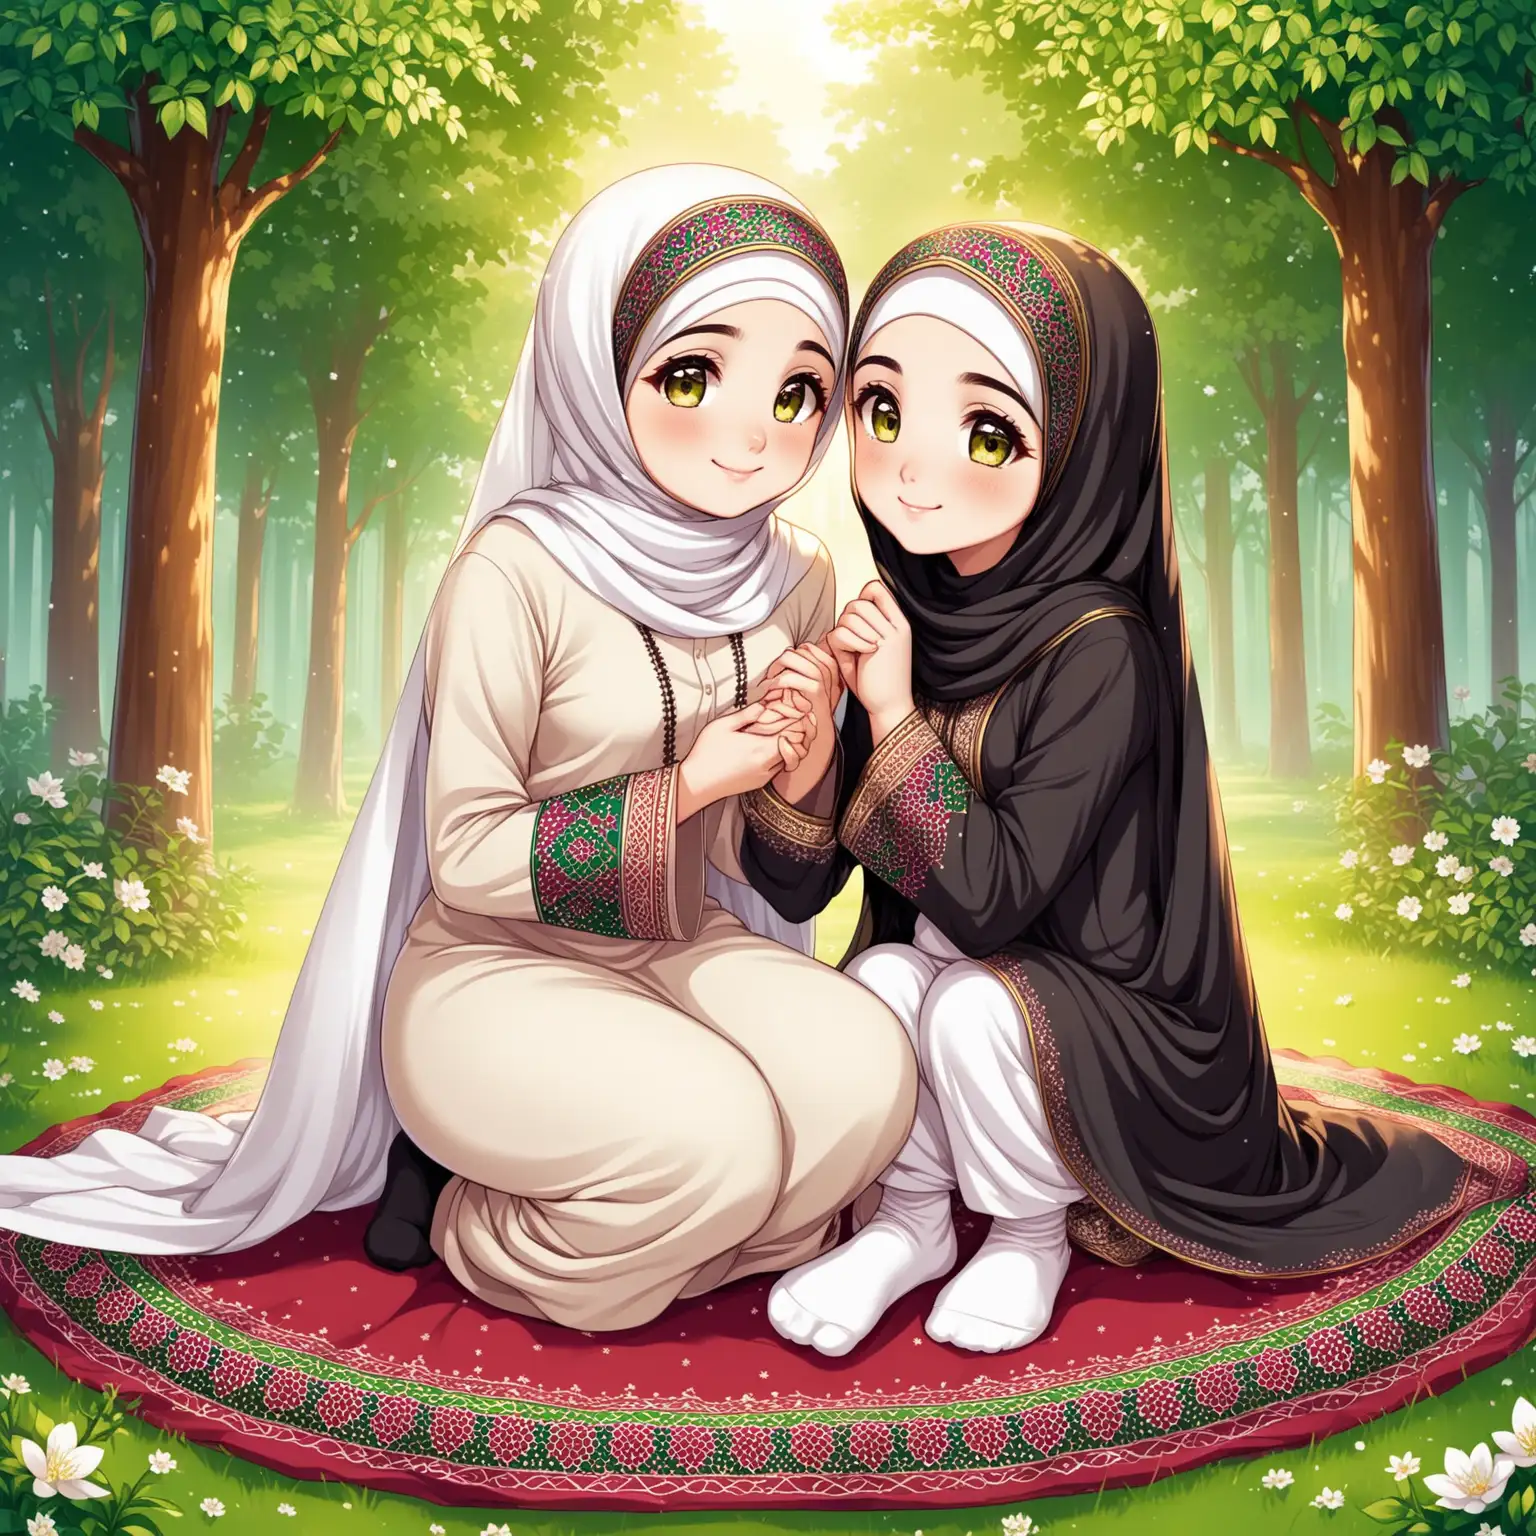 Character Persian girl(full height, Muslim, with emphasis no hair out of veil(Hijab), smaller eyes, bigger nose, white skin, cute, smiling, wearing socks, clothes full of Persian designs) named Fatemeh.
Mother of Fatemeh's name is Roqayeh, Roqayeh is wearing modest clothes, veil.
Fatemeh is sitting and kissing the hand of her mother Roqayeh politely.

Atmosphere forest, grass flowers, etc...